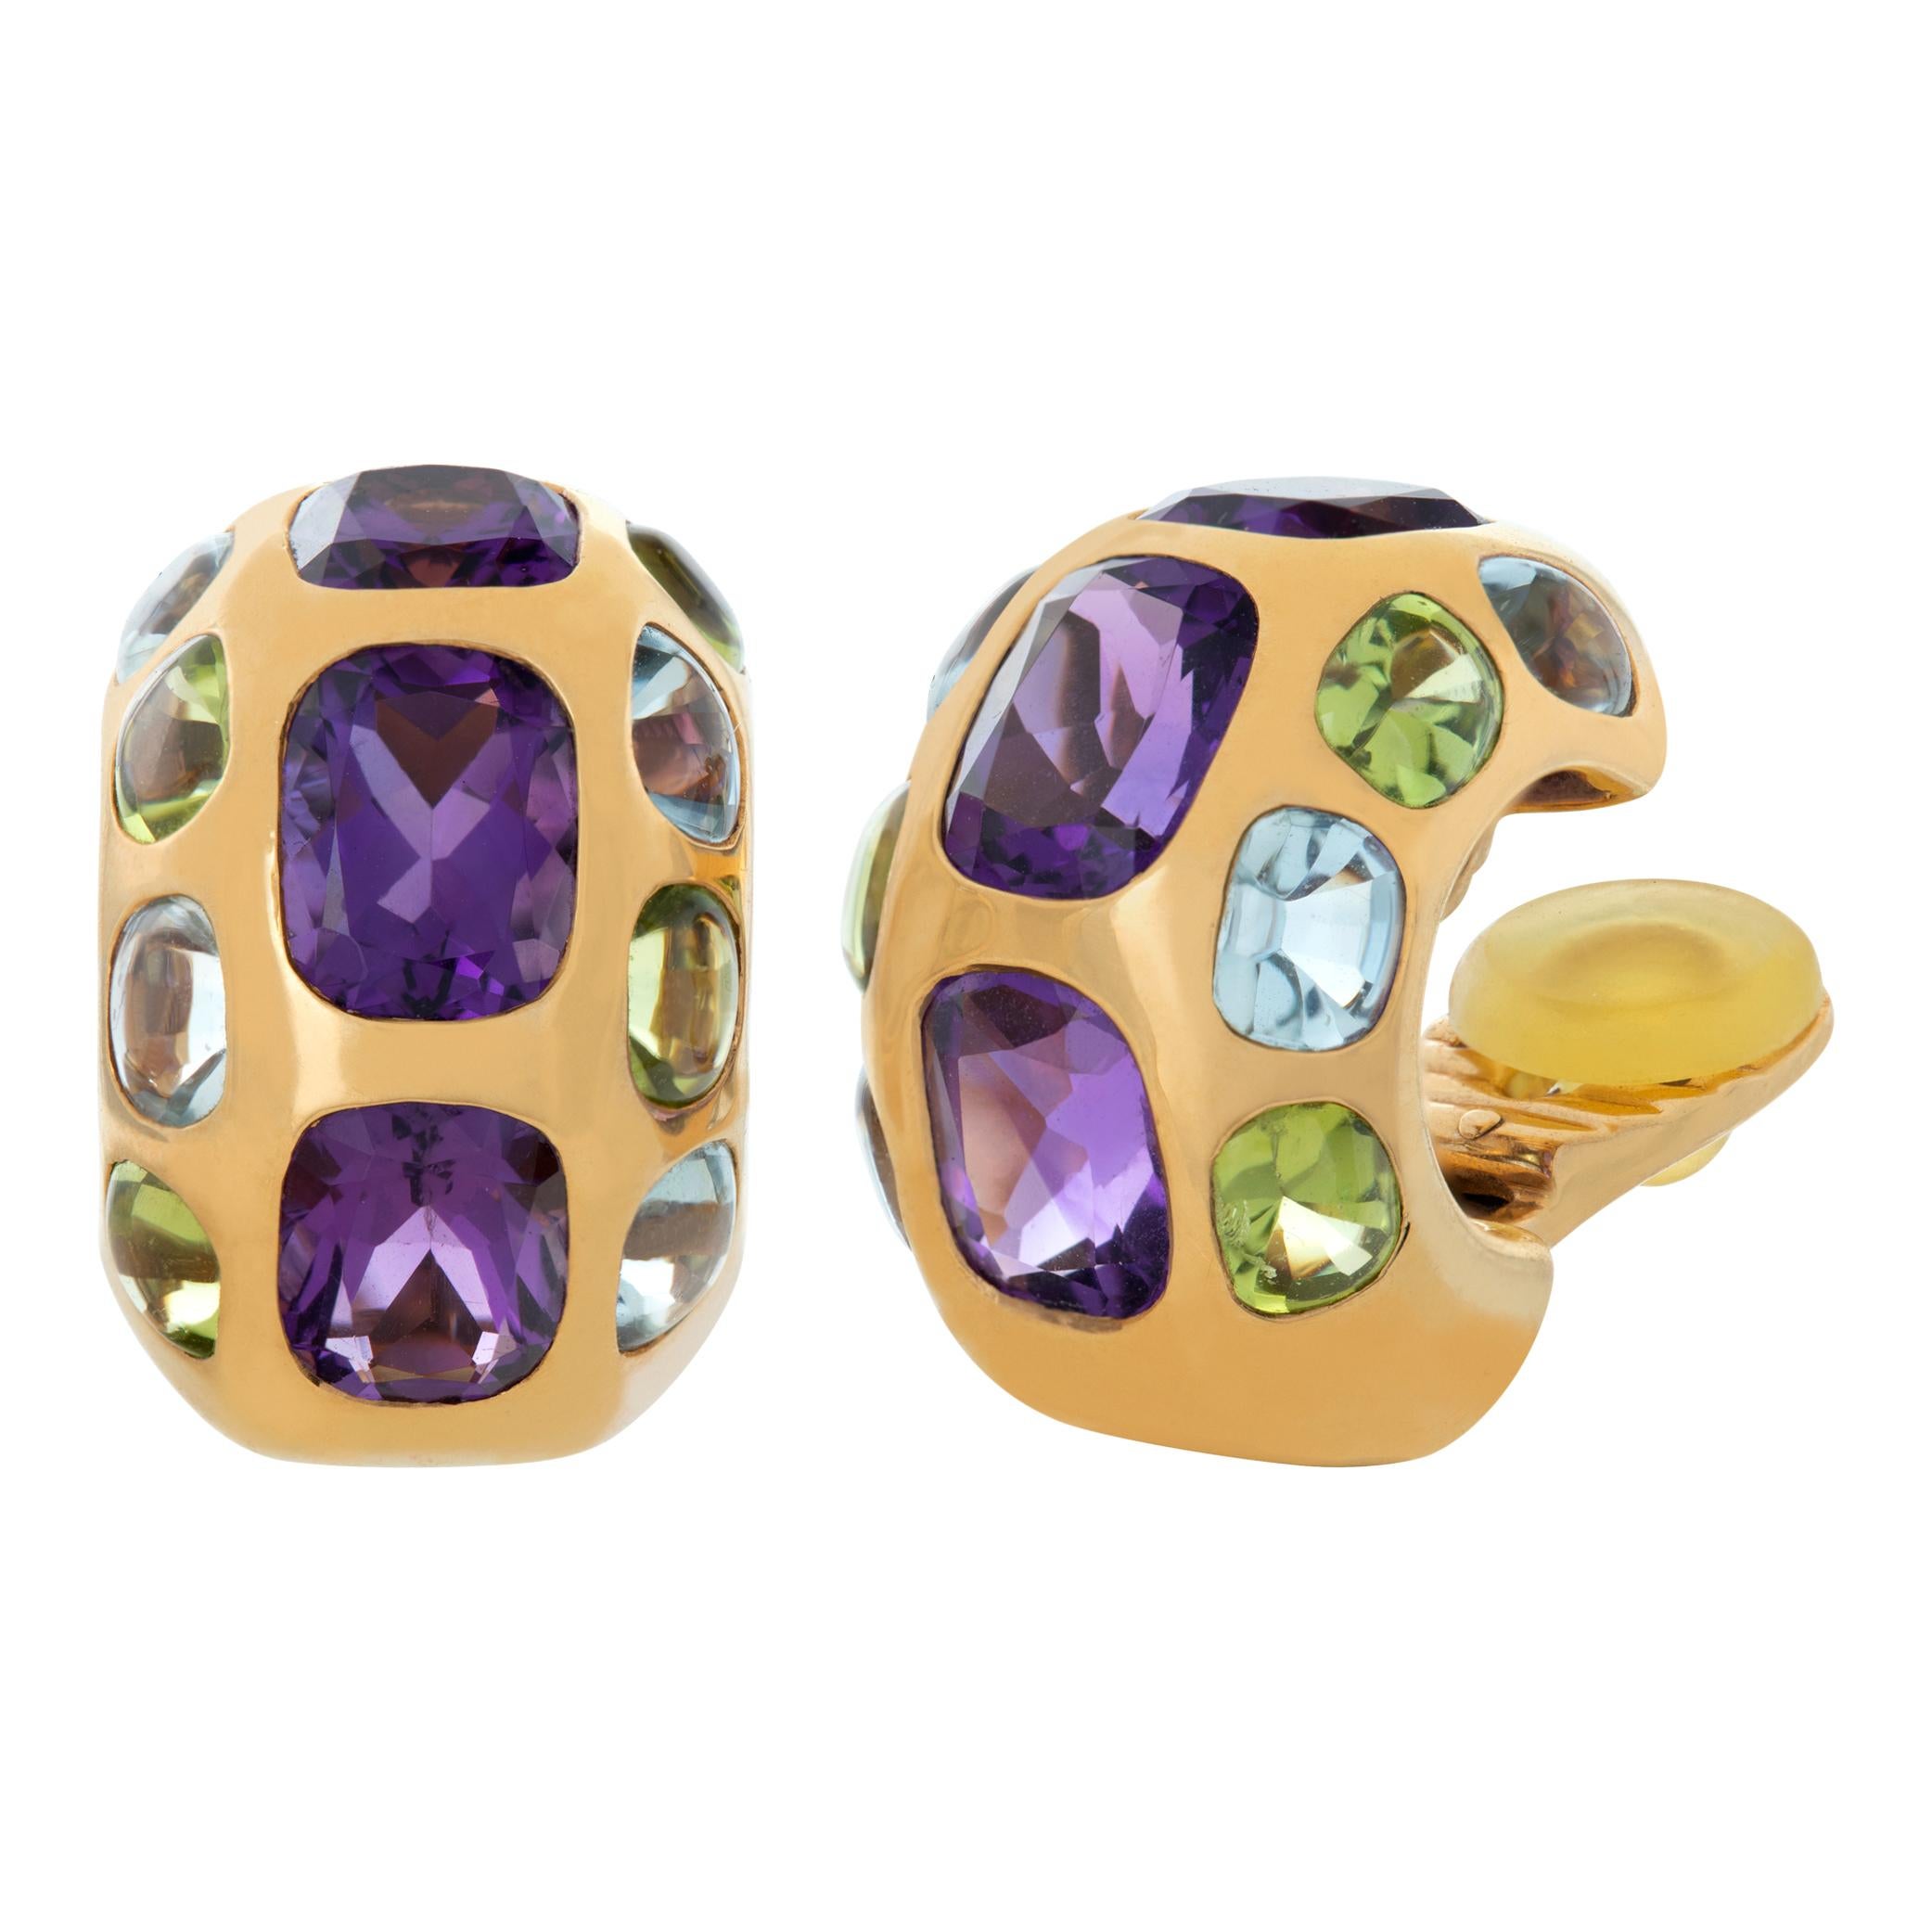 Round Cut Chanel Earrings with Amethyst, Peridot and Aquamarine in 18k Yellow Gold